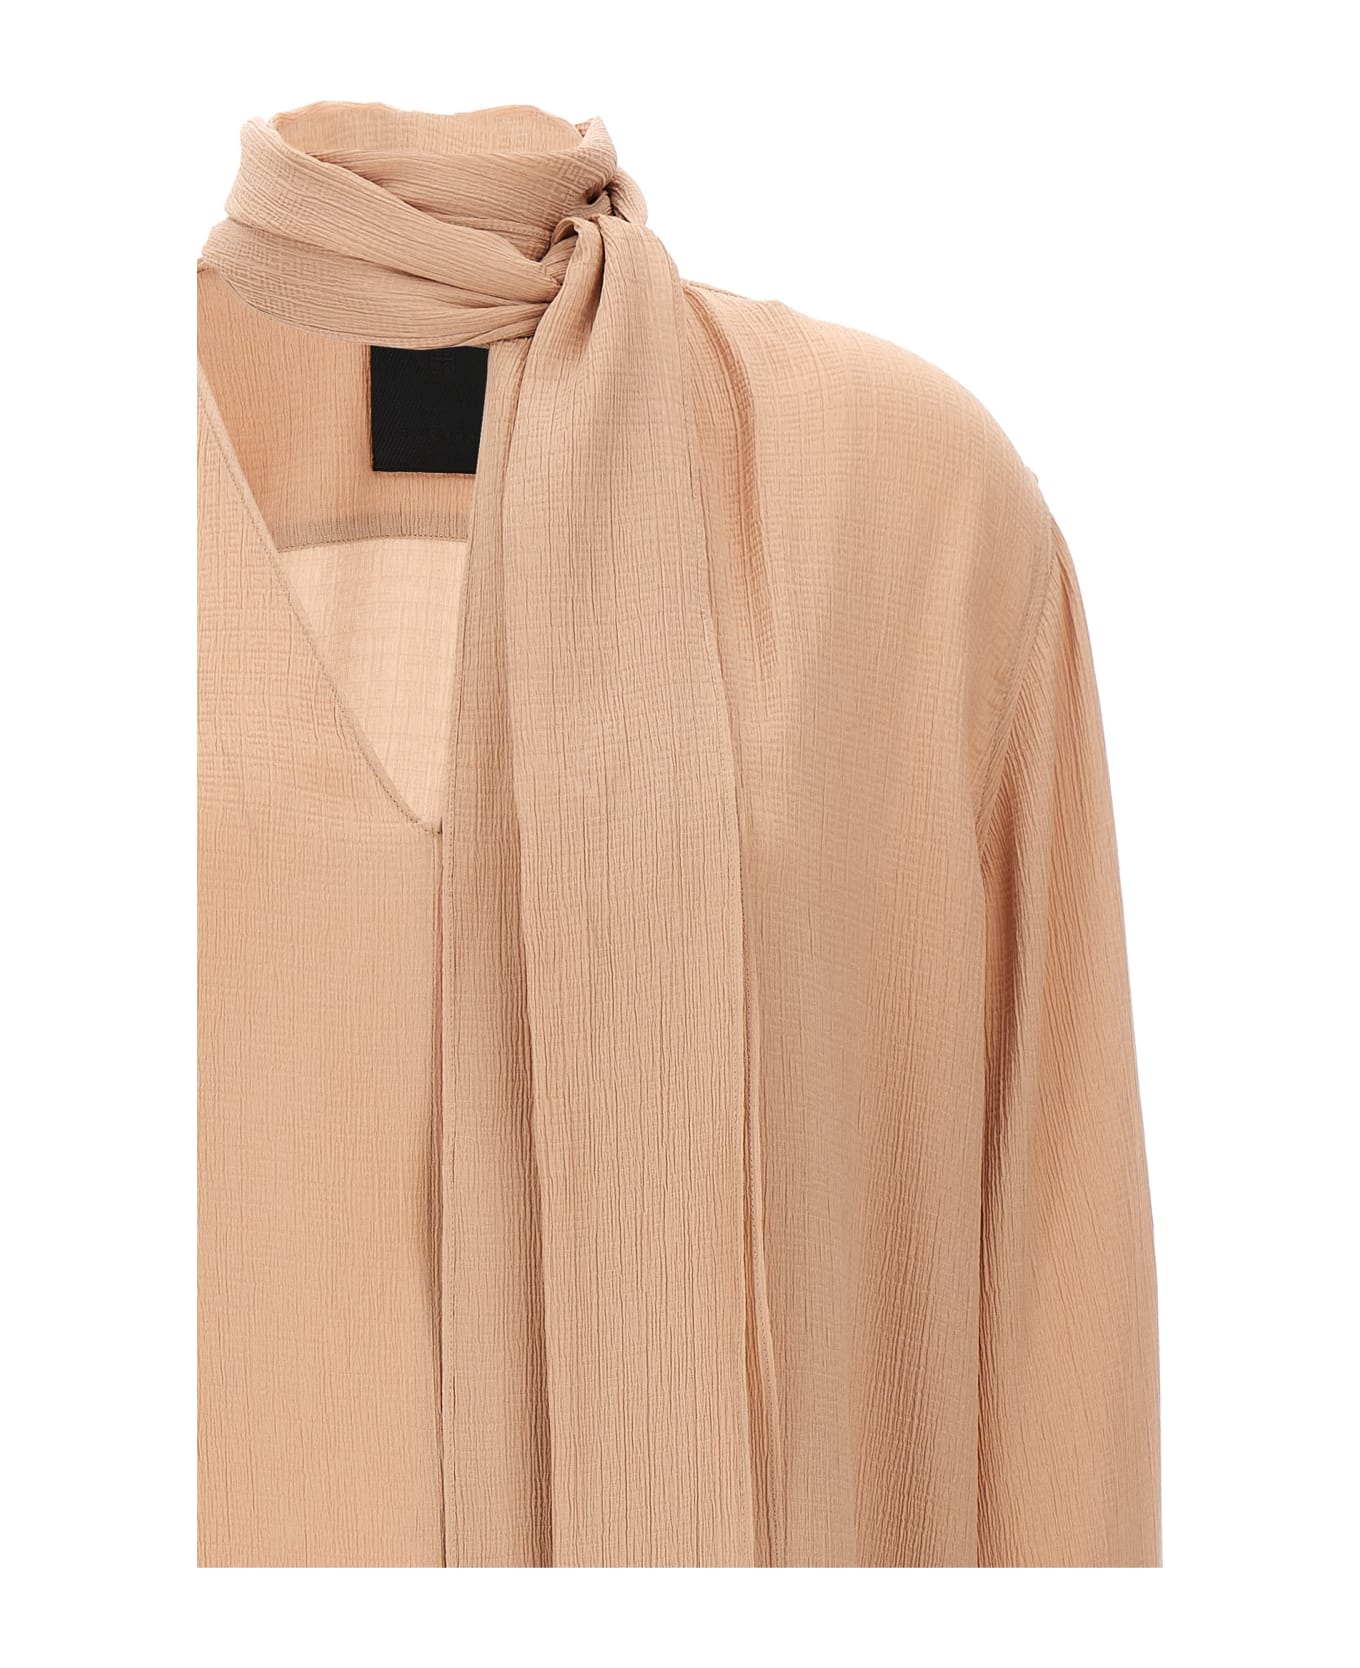 Givenchy Pussy Bow Blouse - Beige